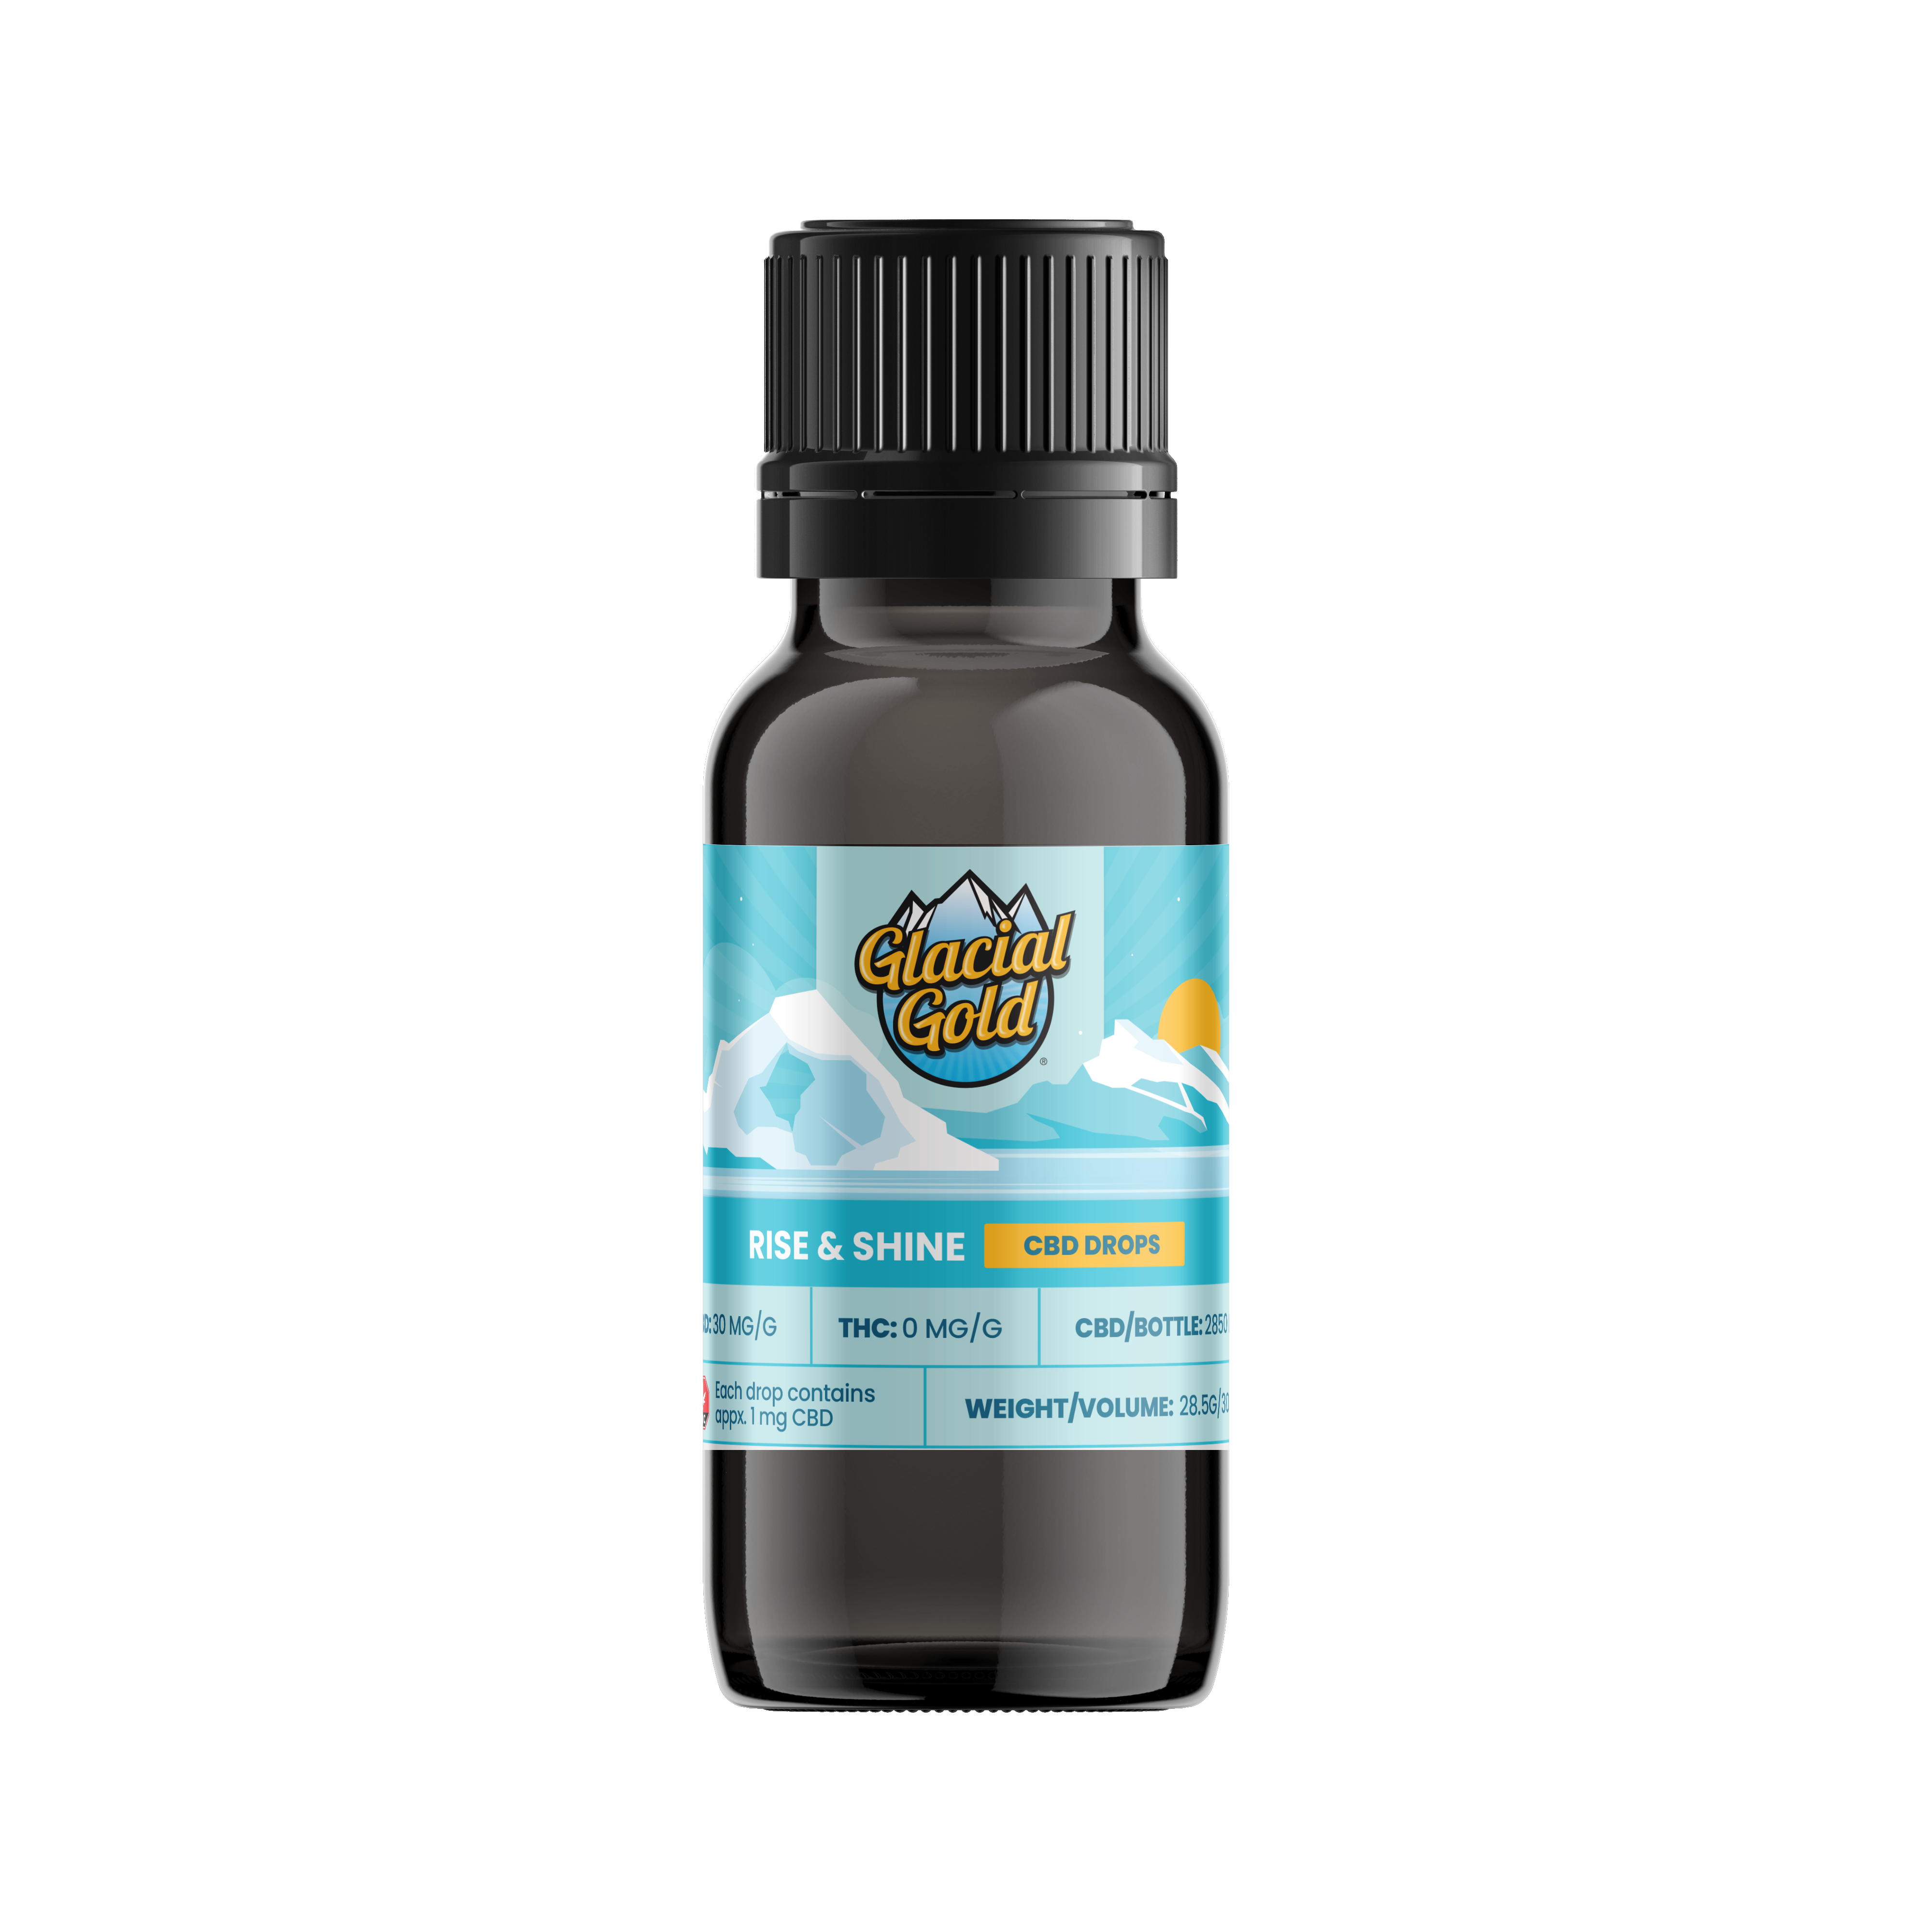 Cannabis Product Glacial Gold - Rise & Shine CBD Drops by Glacial Gold